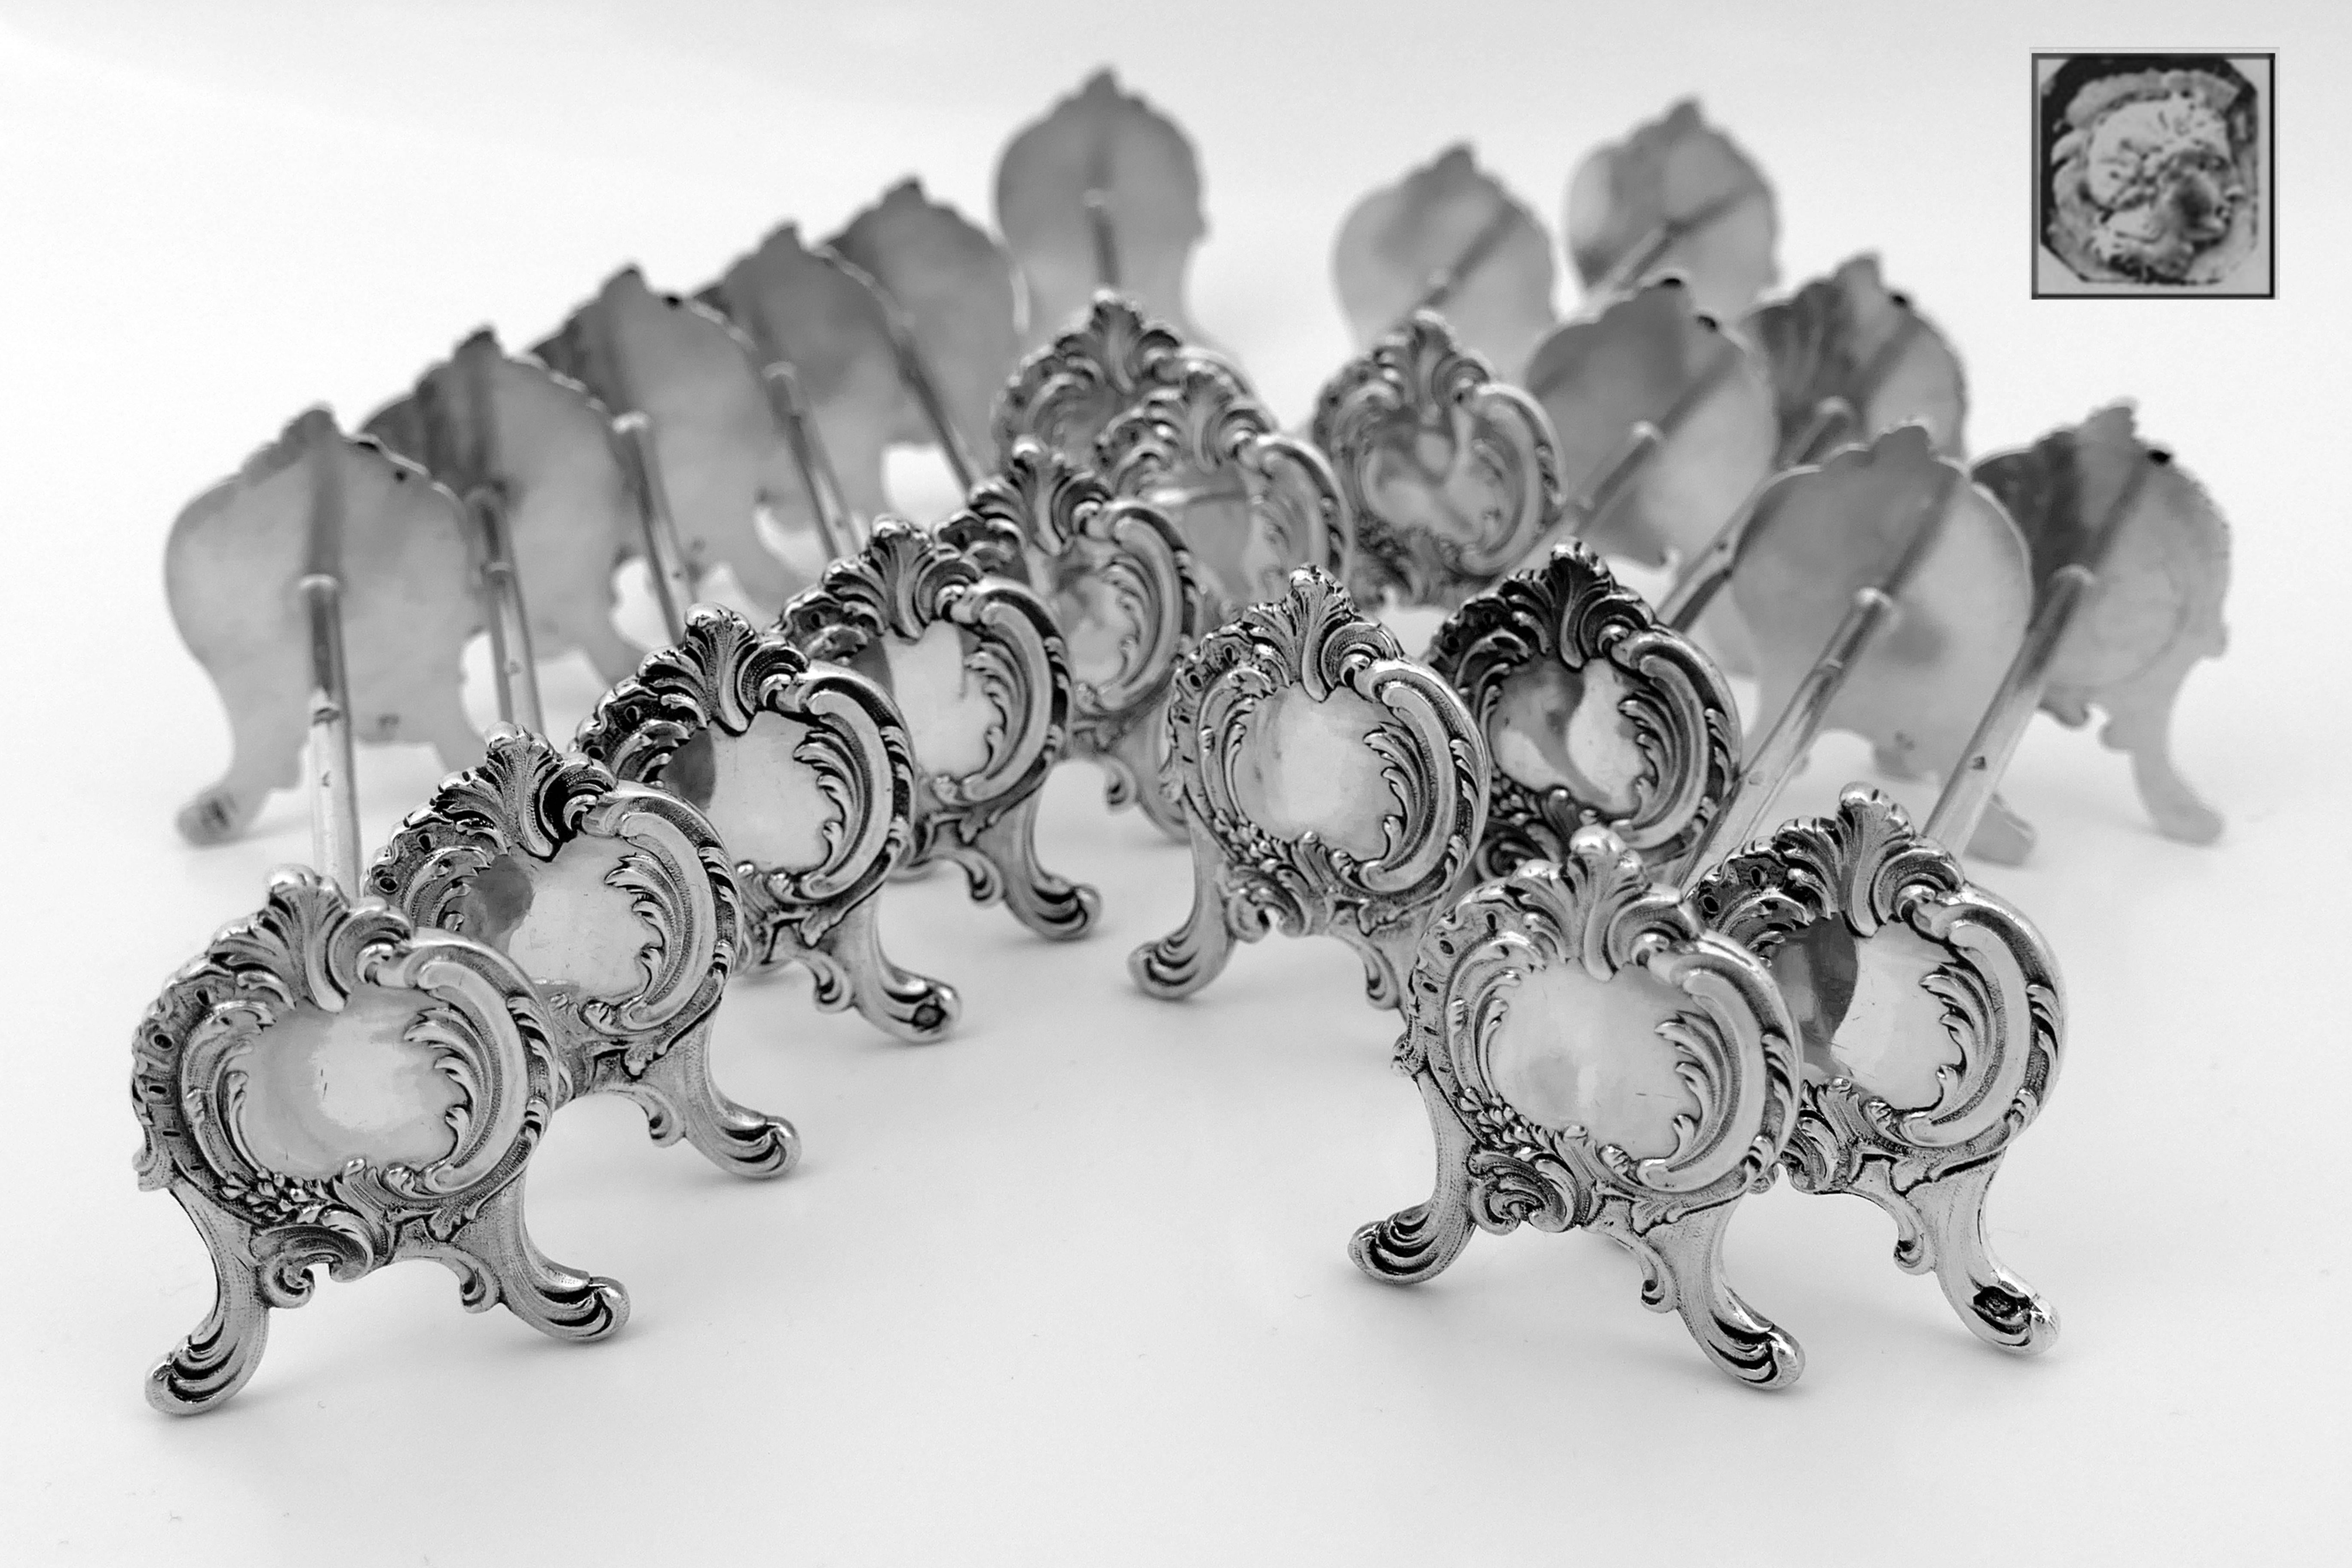 Henin French all sterling silver knife rests set of twelve-pieces Rococo.

Extremely rare model of knife rests set. It is even rarer to see full service of 12 pieces of French sterling silver. These objects are usually made of silver plate. Finesse